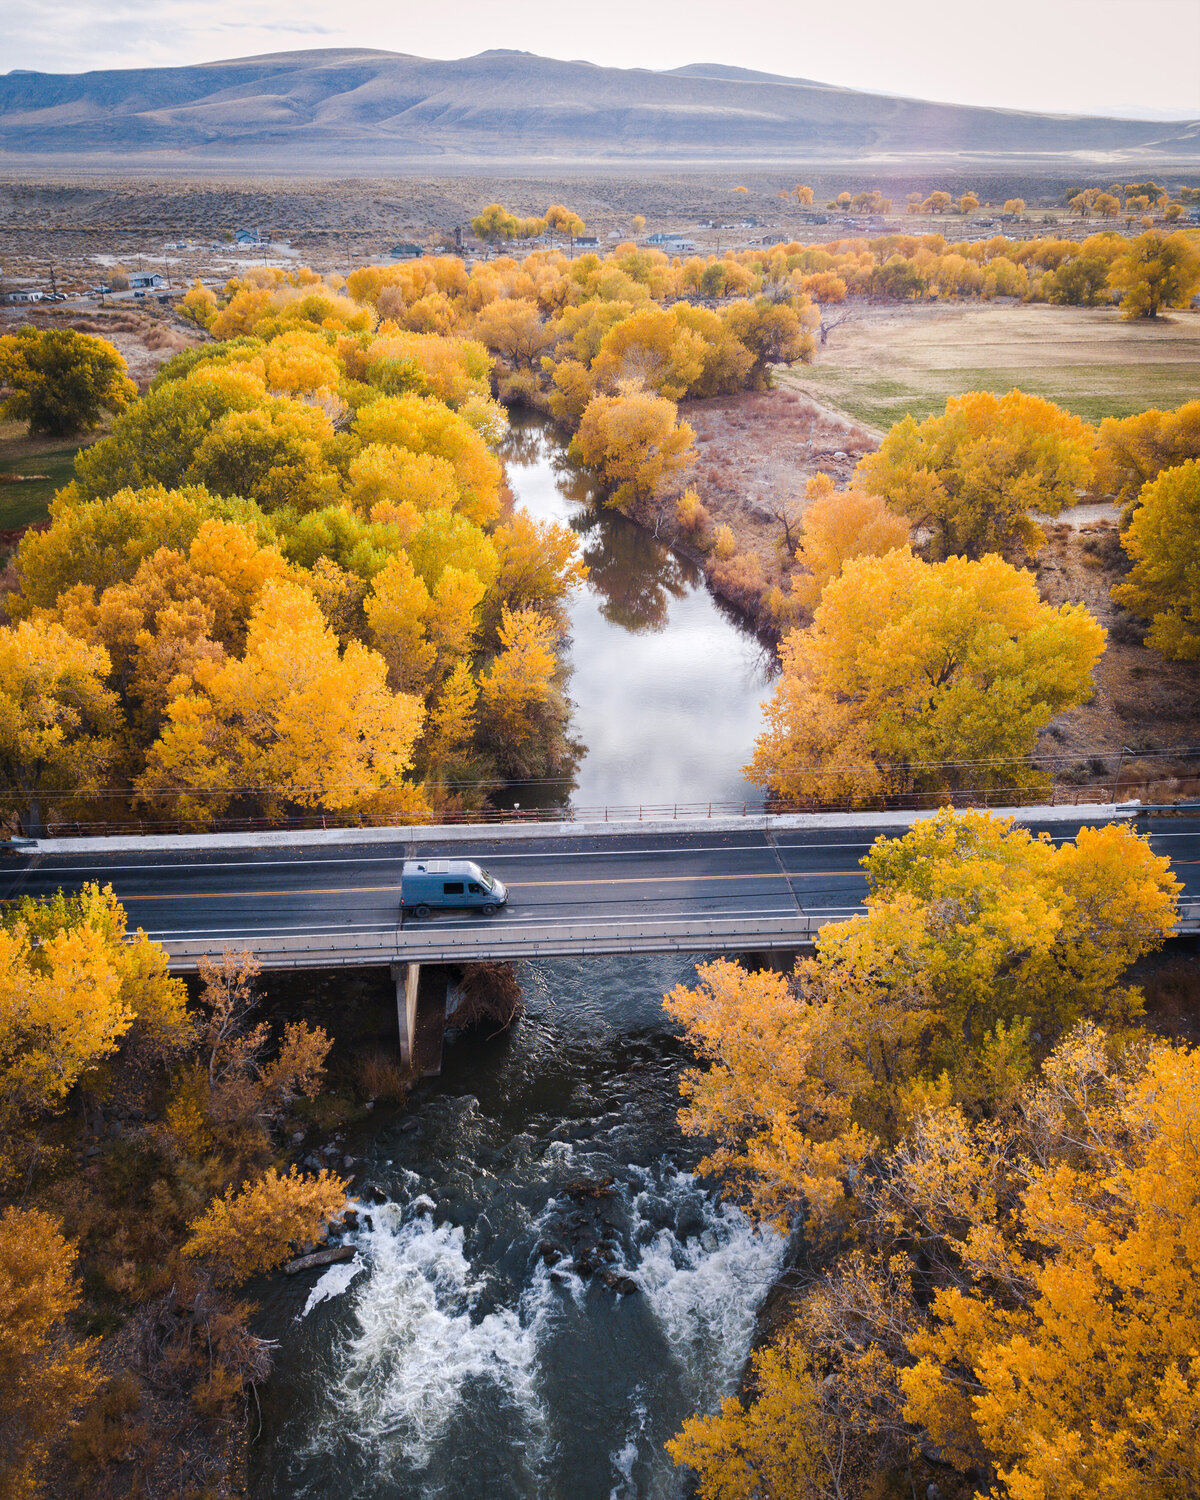 Car driving on a bridge crossing water surrounded by trees with yellow leaves and mountain in the background